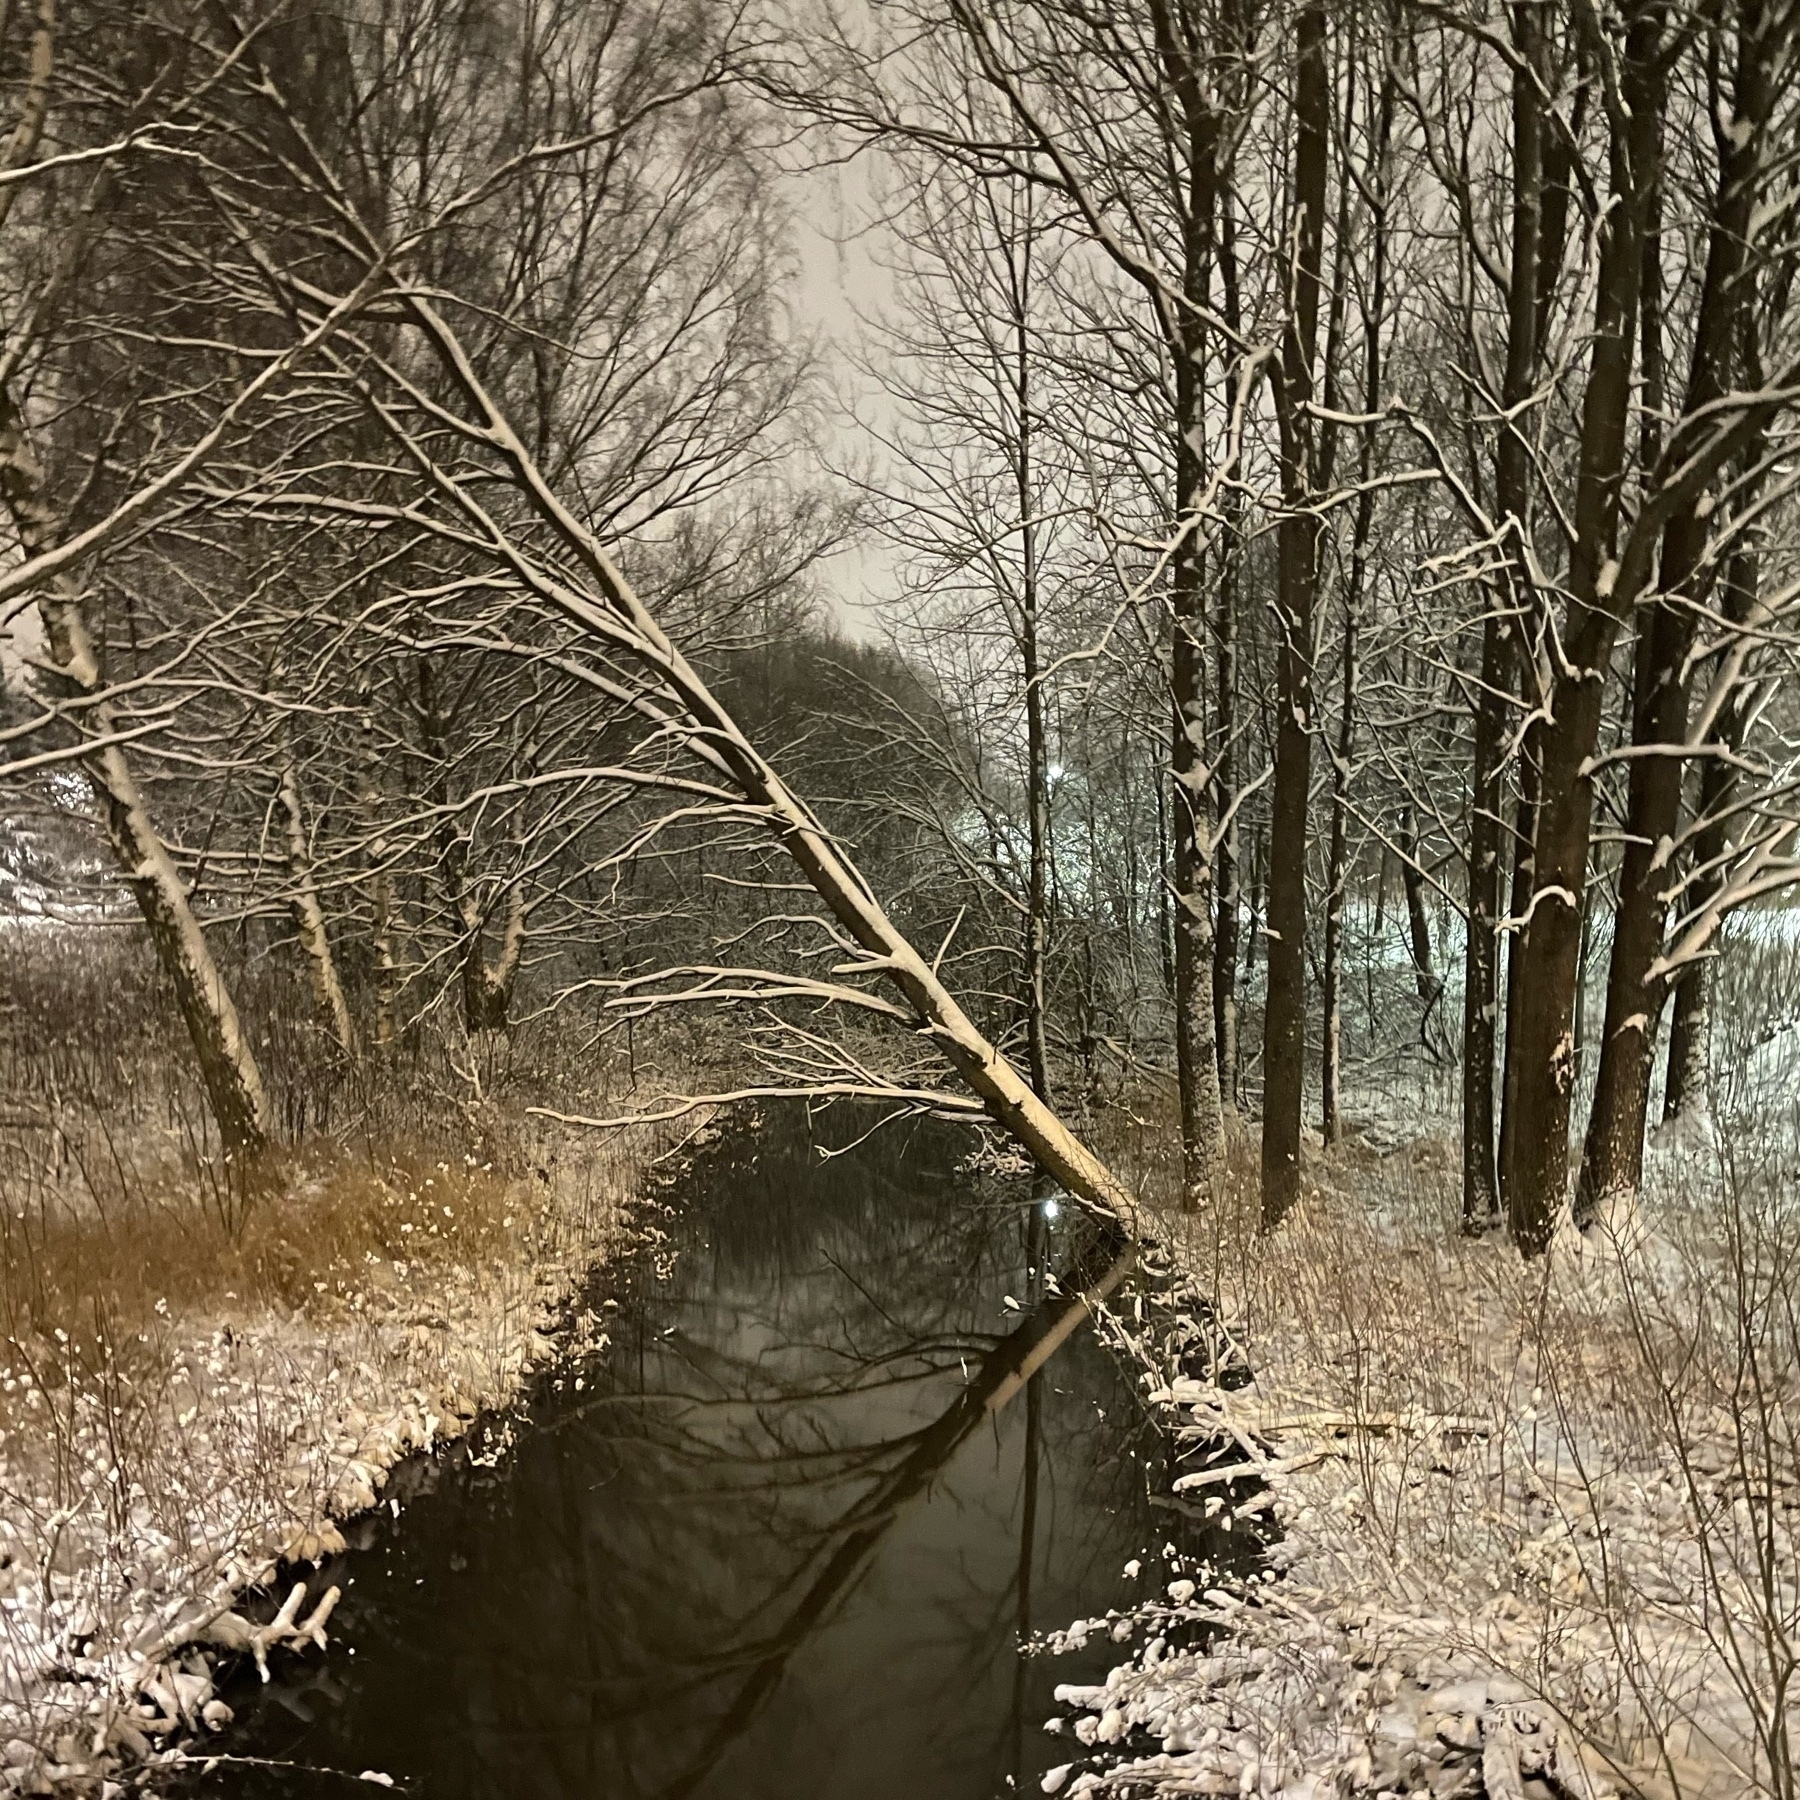 snowy trees leaning over a dark stream still flowing free